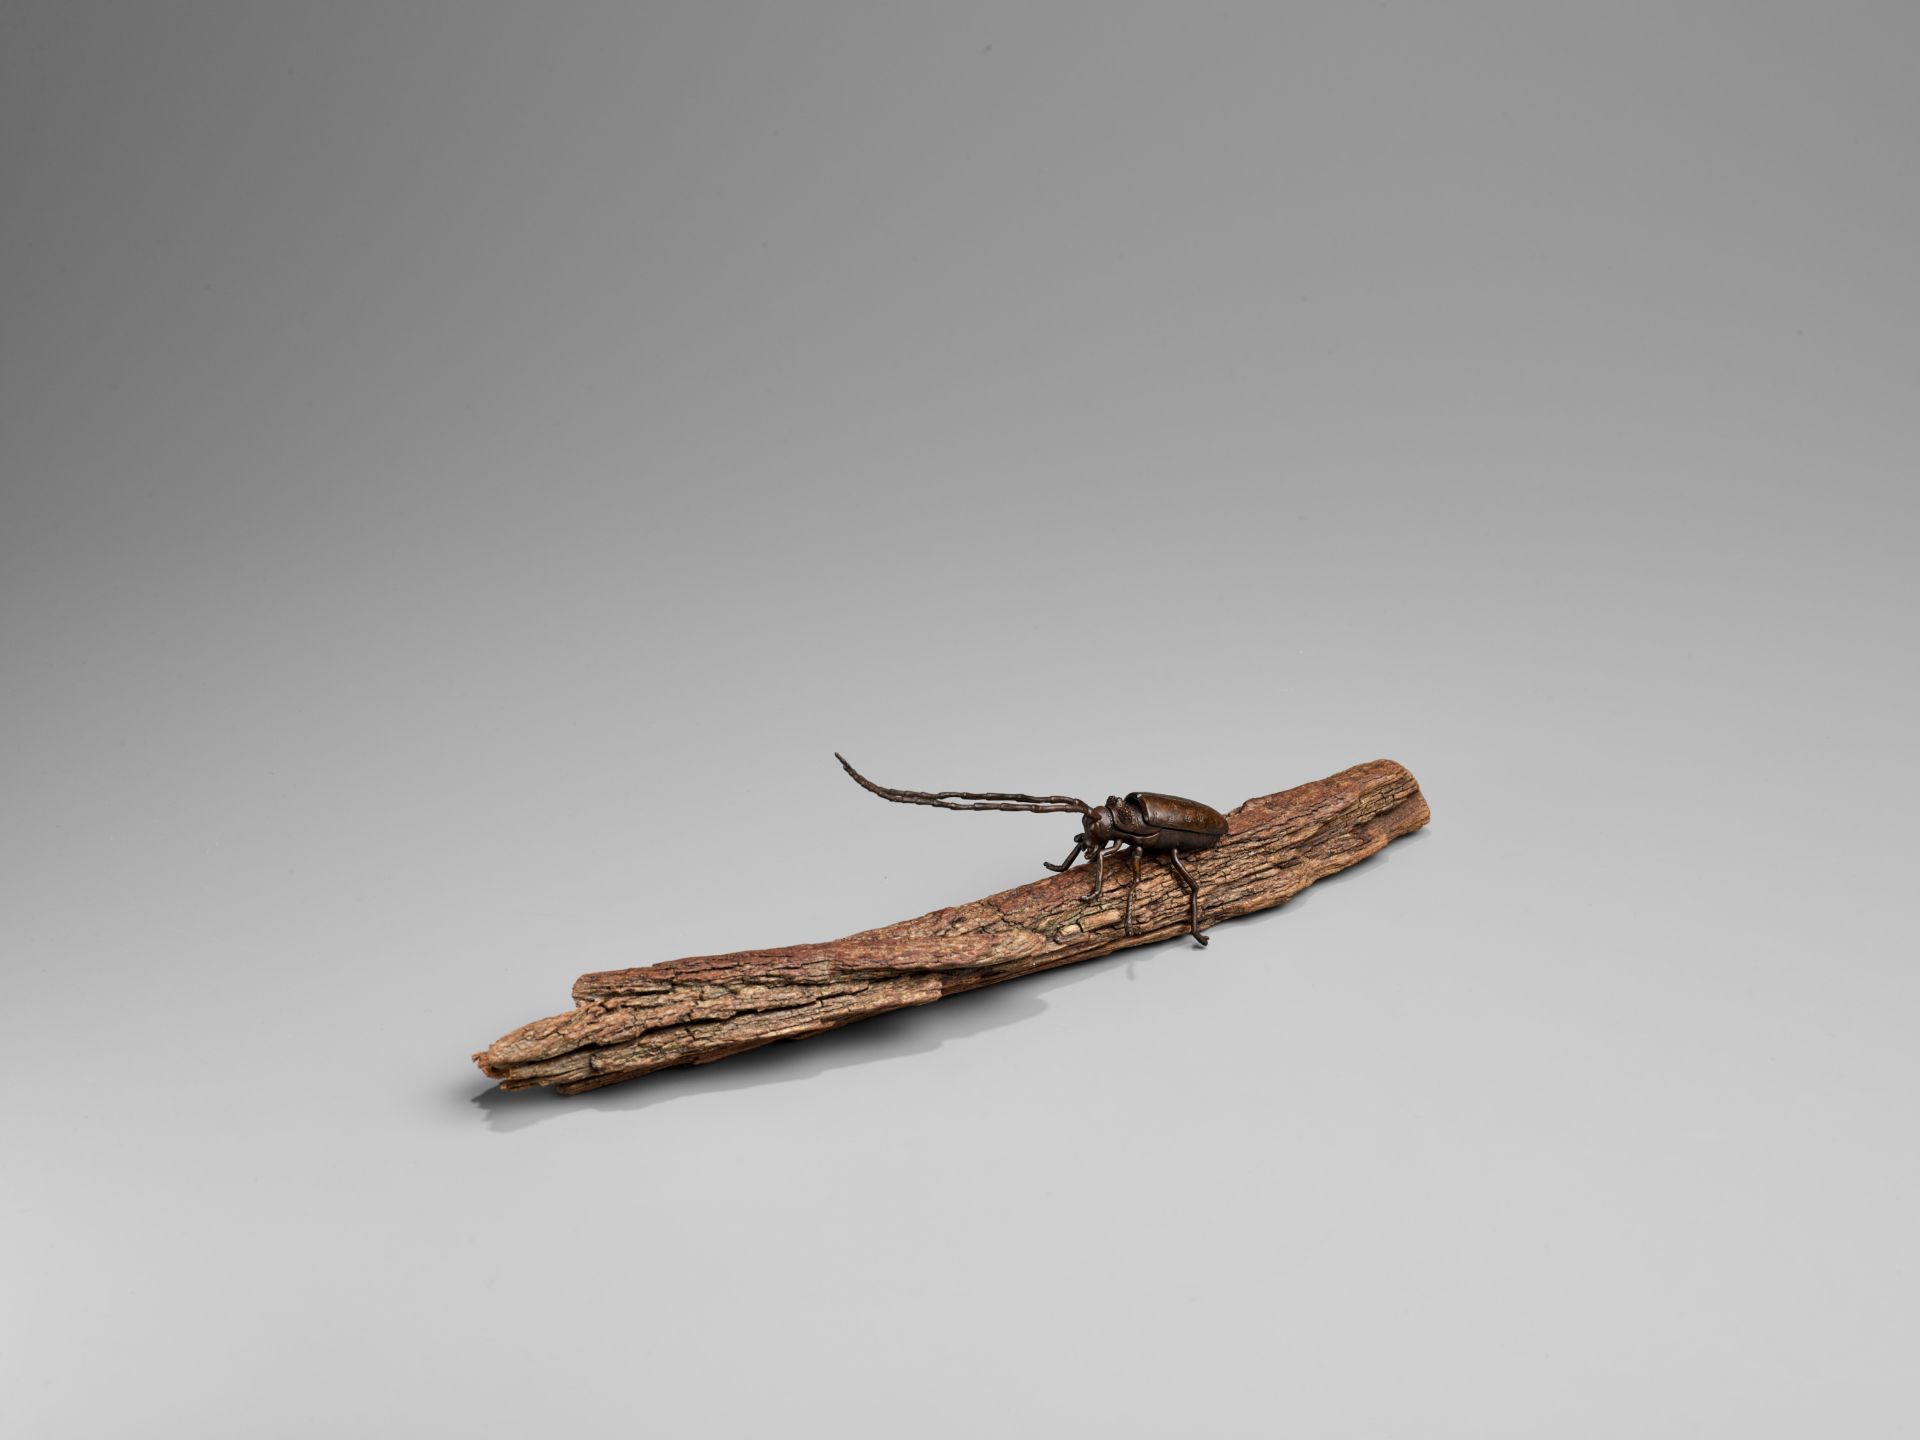 AN ARTICULATED BRONZE OKIMONO OF A SAWYER BEETLE CLIMBING A ROOTWOOD LOG - Image 3 of 9